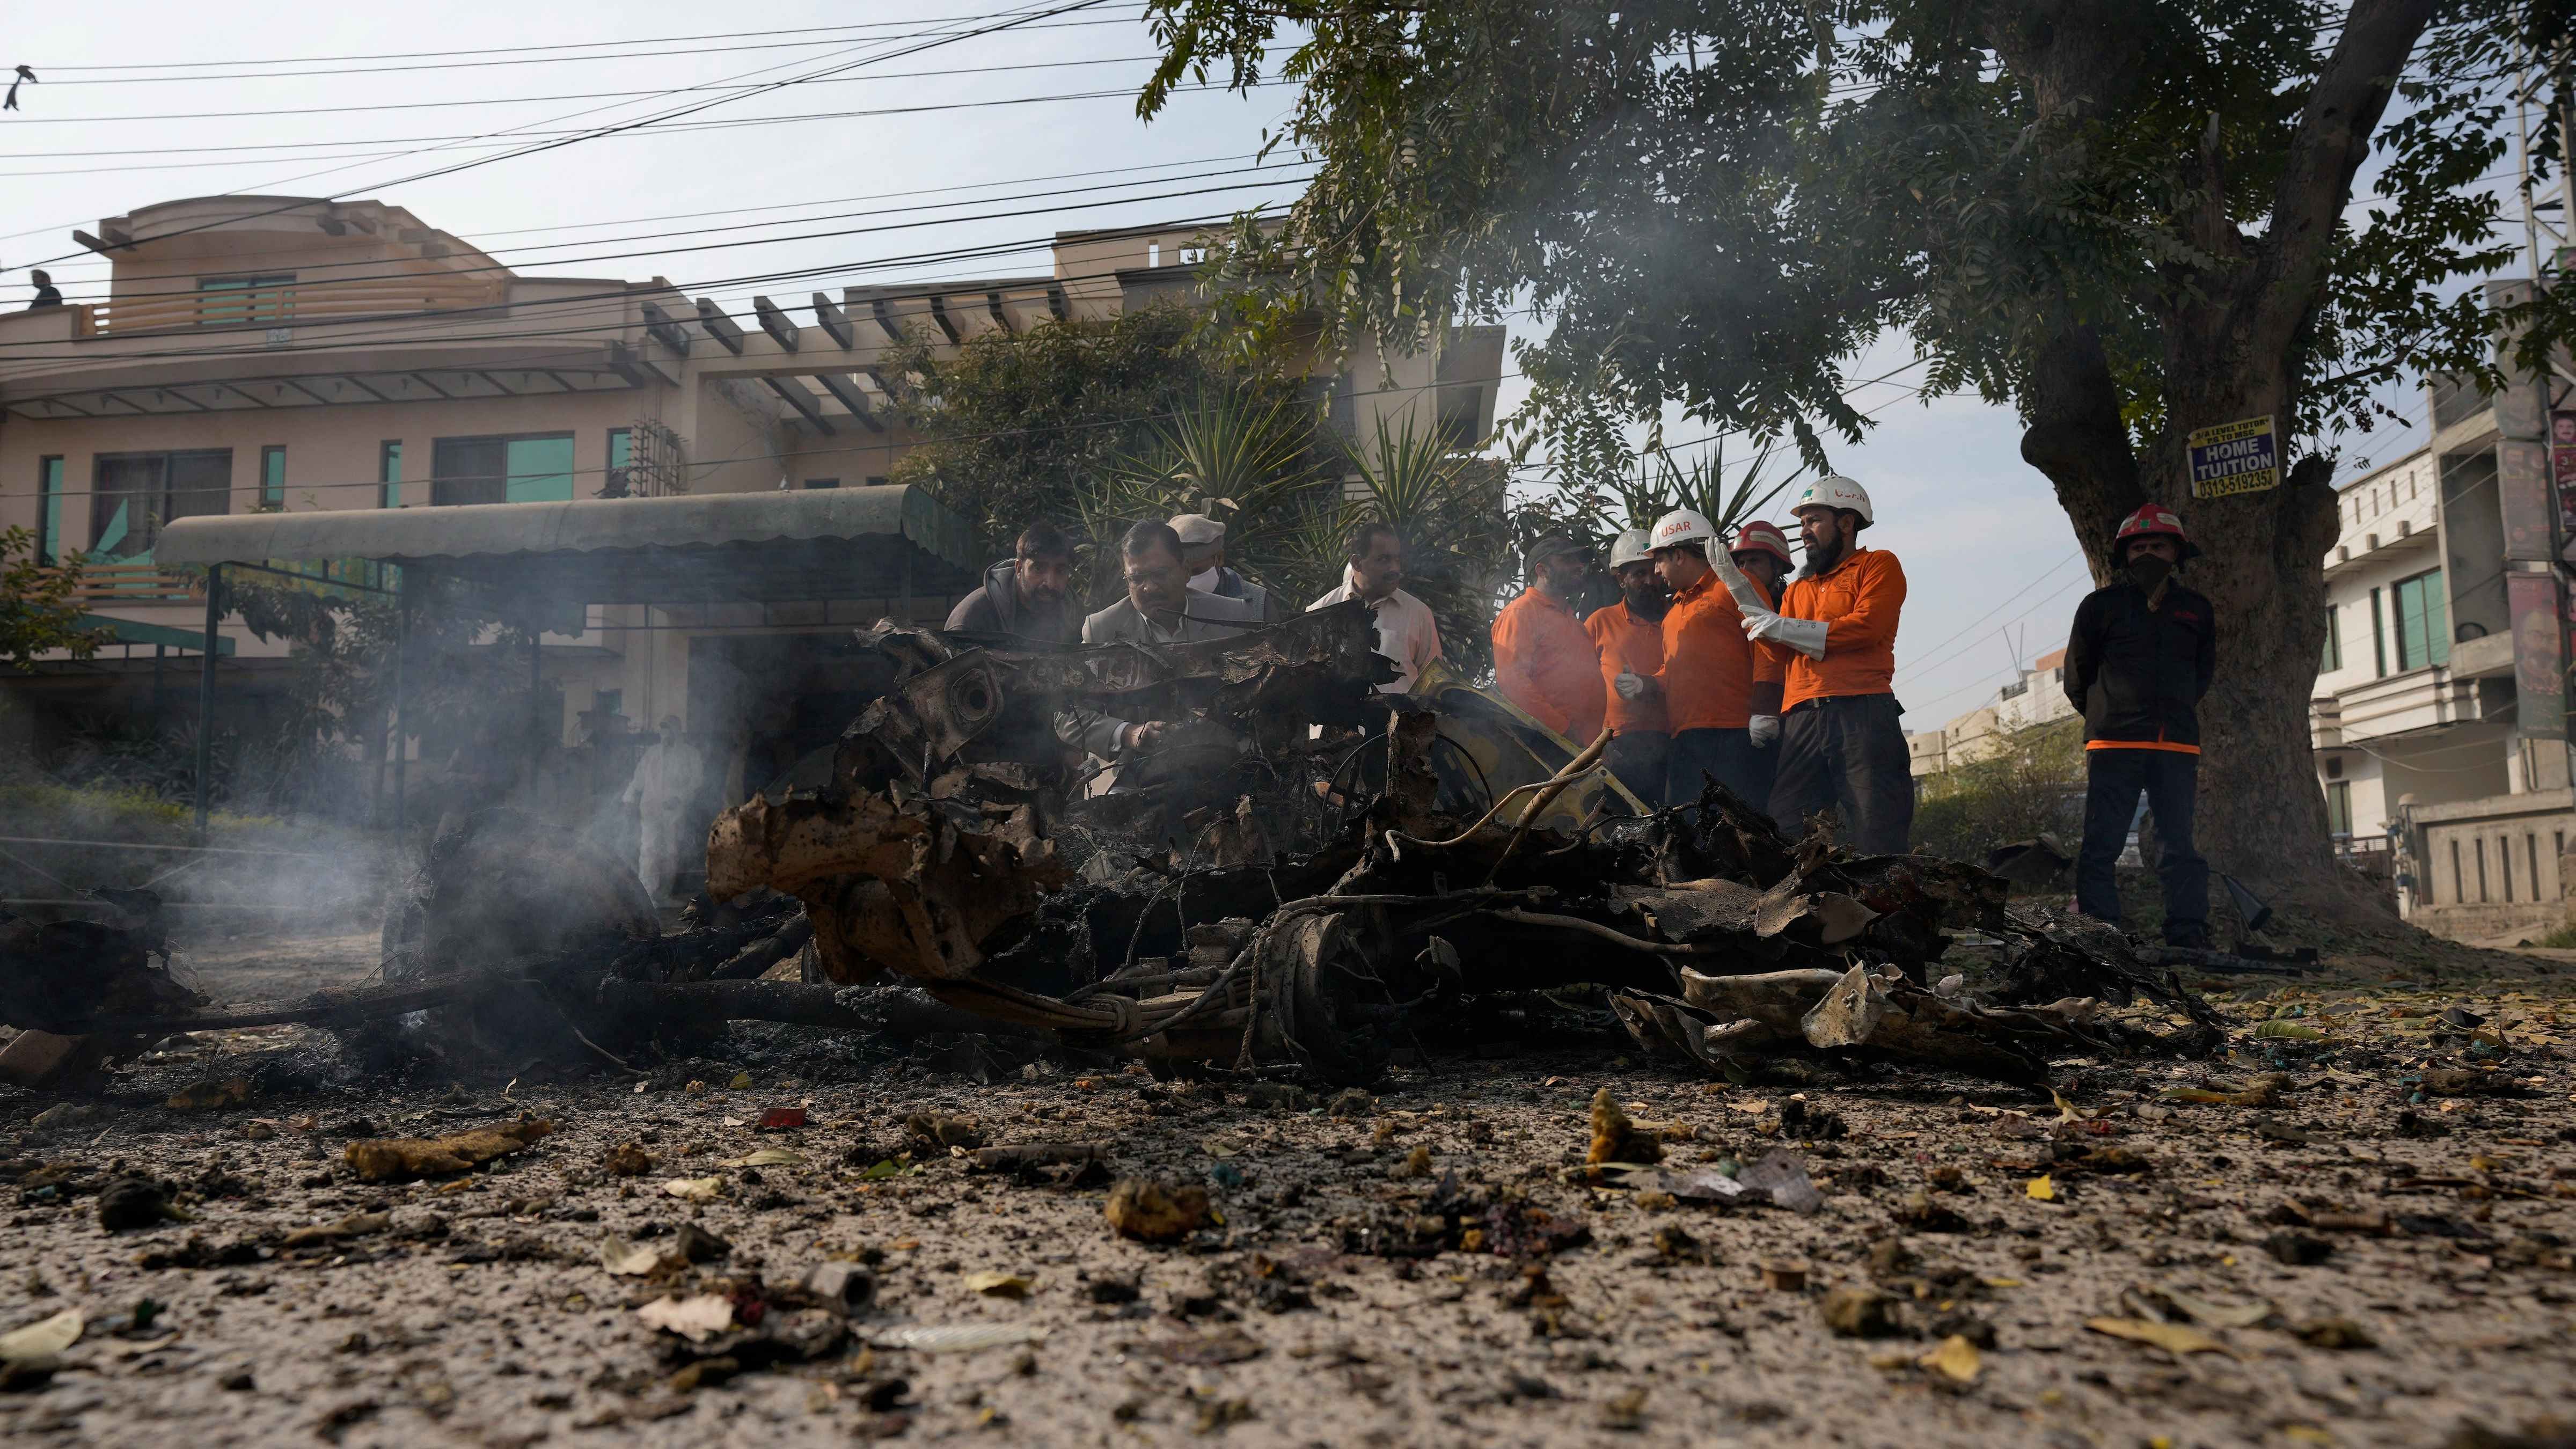 Security officials examine the wreckage of a car at the site of bomb explosion, in Islamabad. Credit: AP/PTI Photo